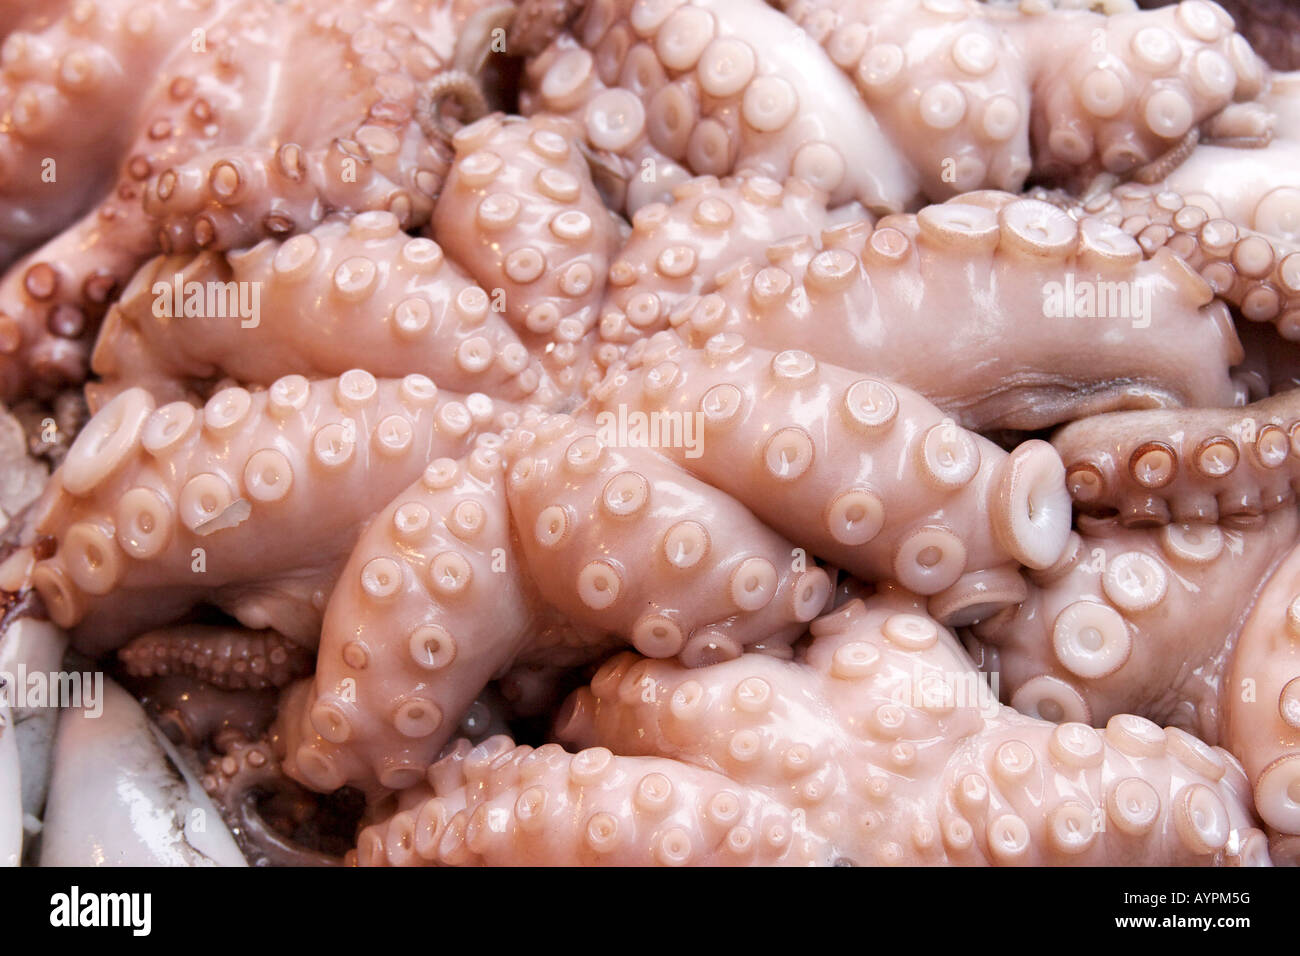 Octopus sold at a fish market Stock Photo